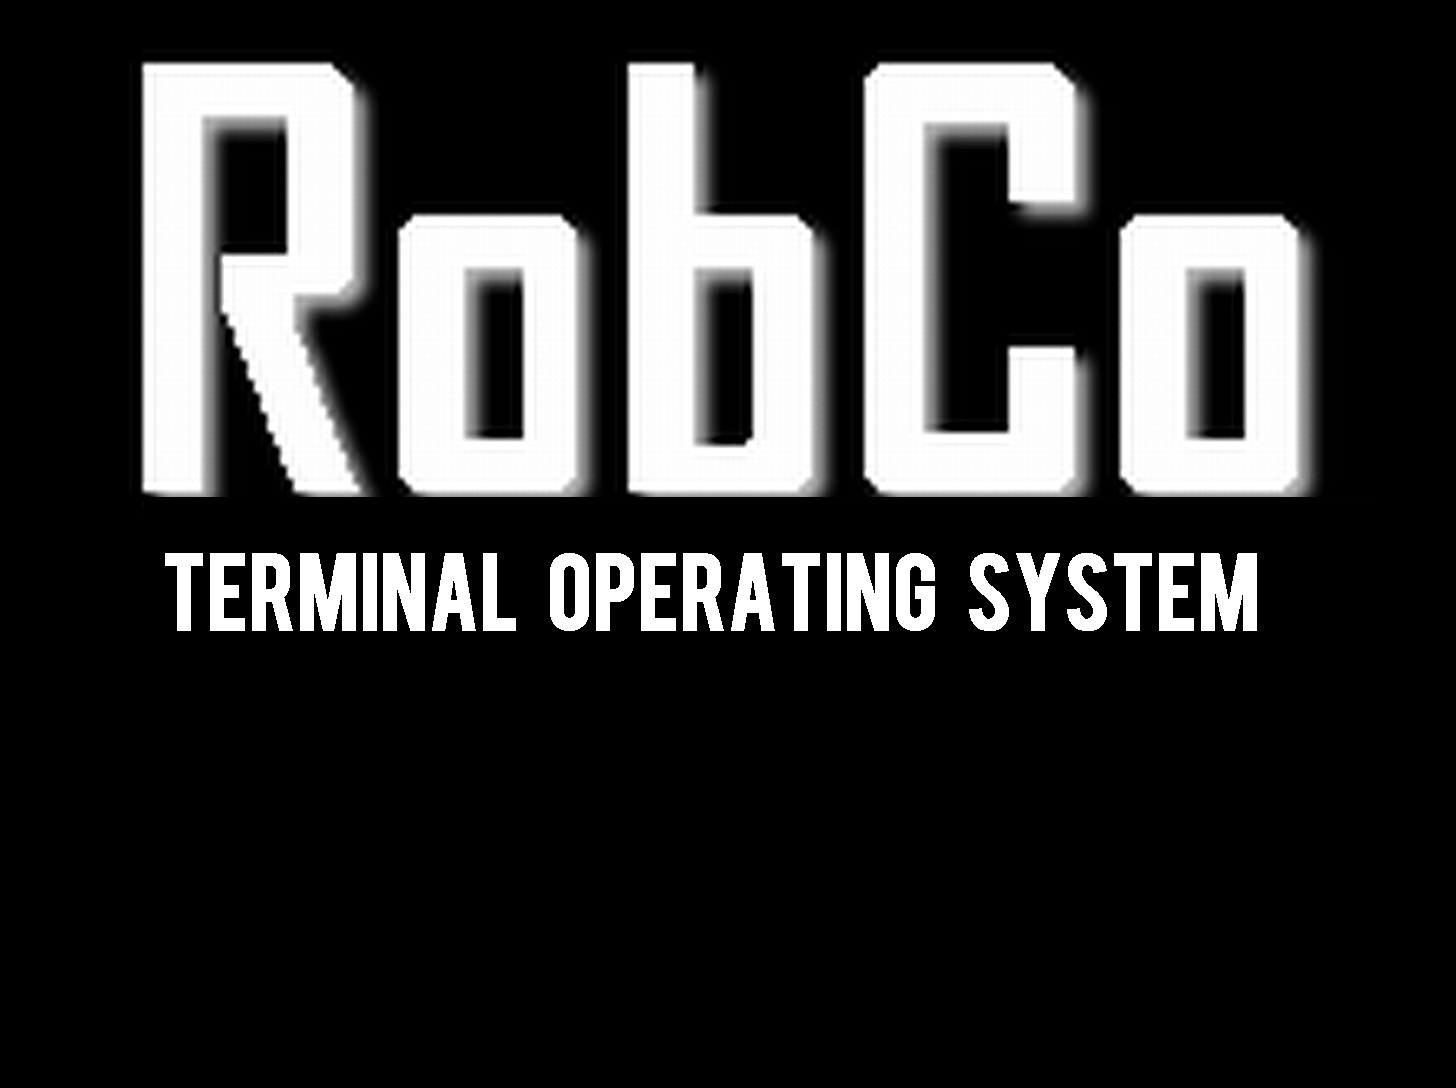 RobCo Operating Systems for Terminals for Fallout: New Vegas